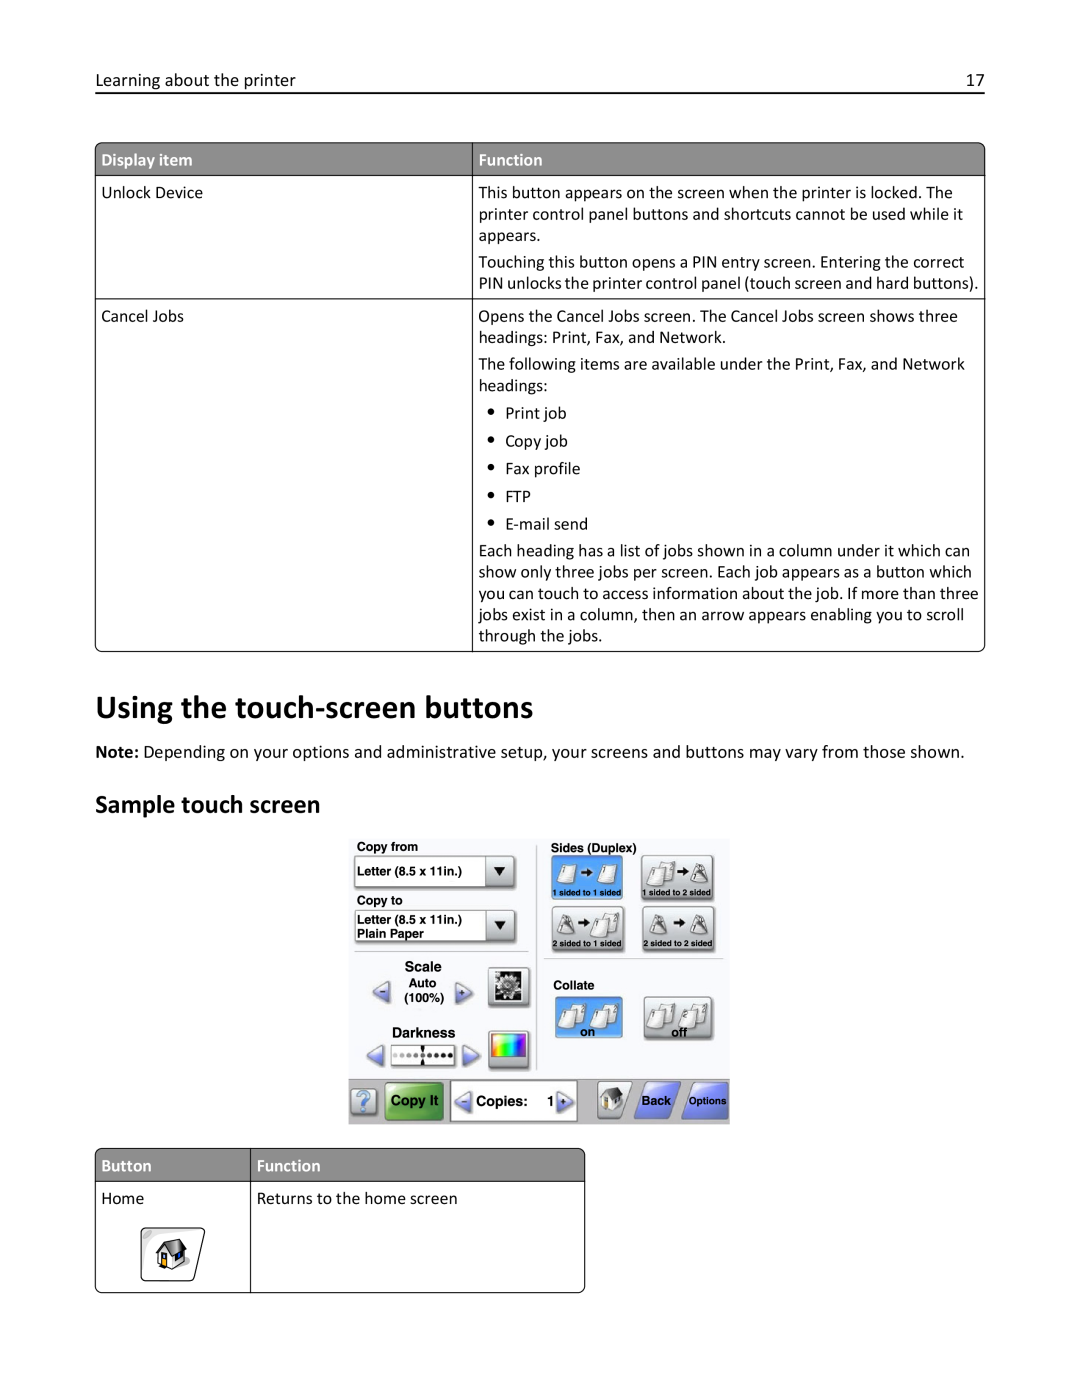 Lexmark X864DE, 432, 19Z0101, 632 Using the touch-screen buttons, Sample touch screen, Display item, Function, Button, Home 